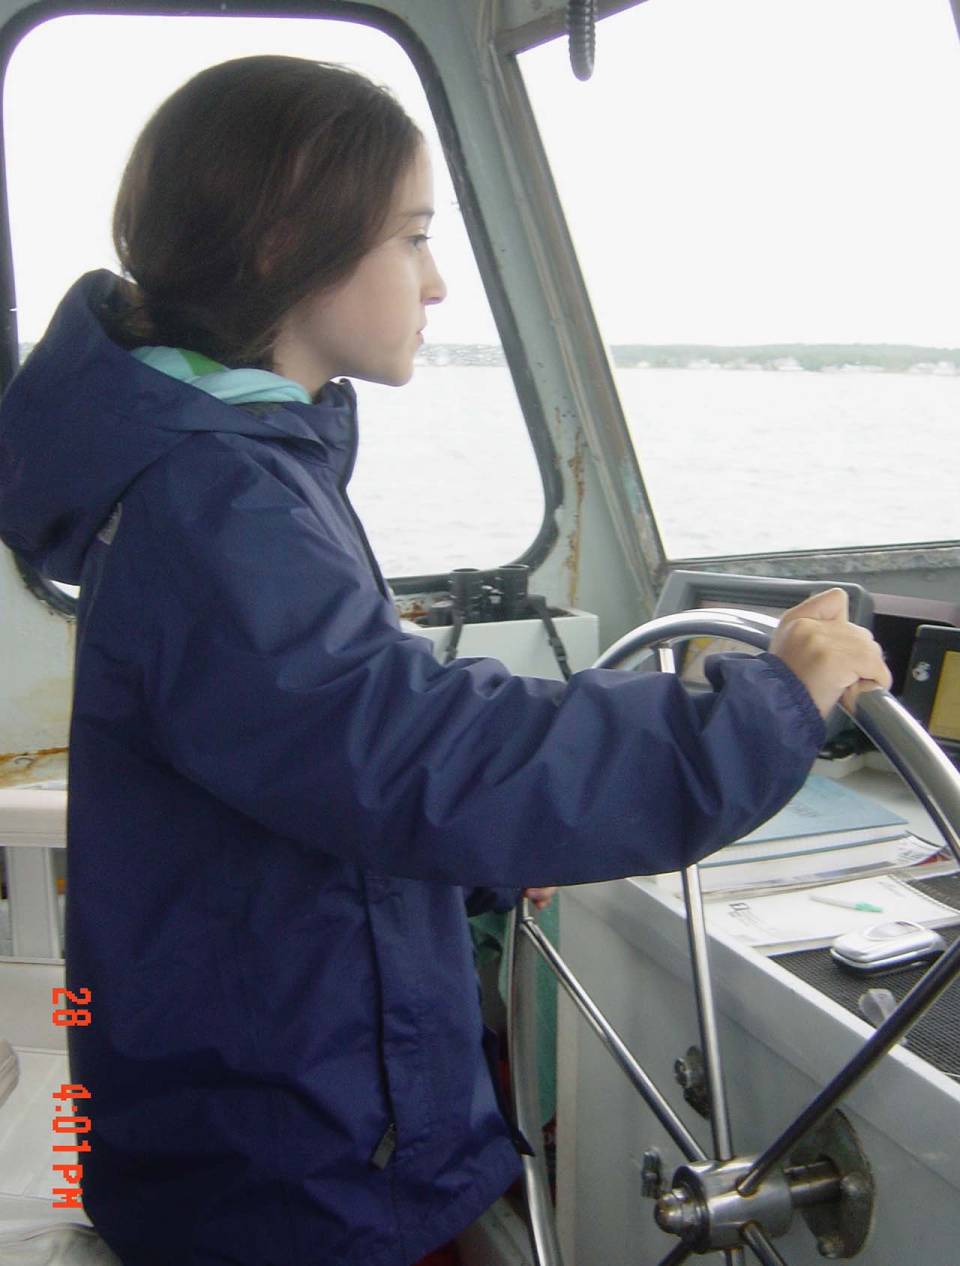 Rachel Sturley as a child steering a boat